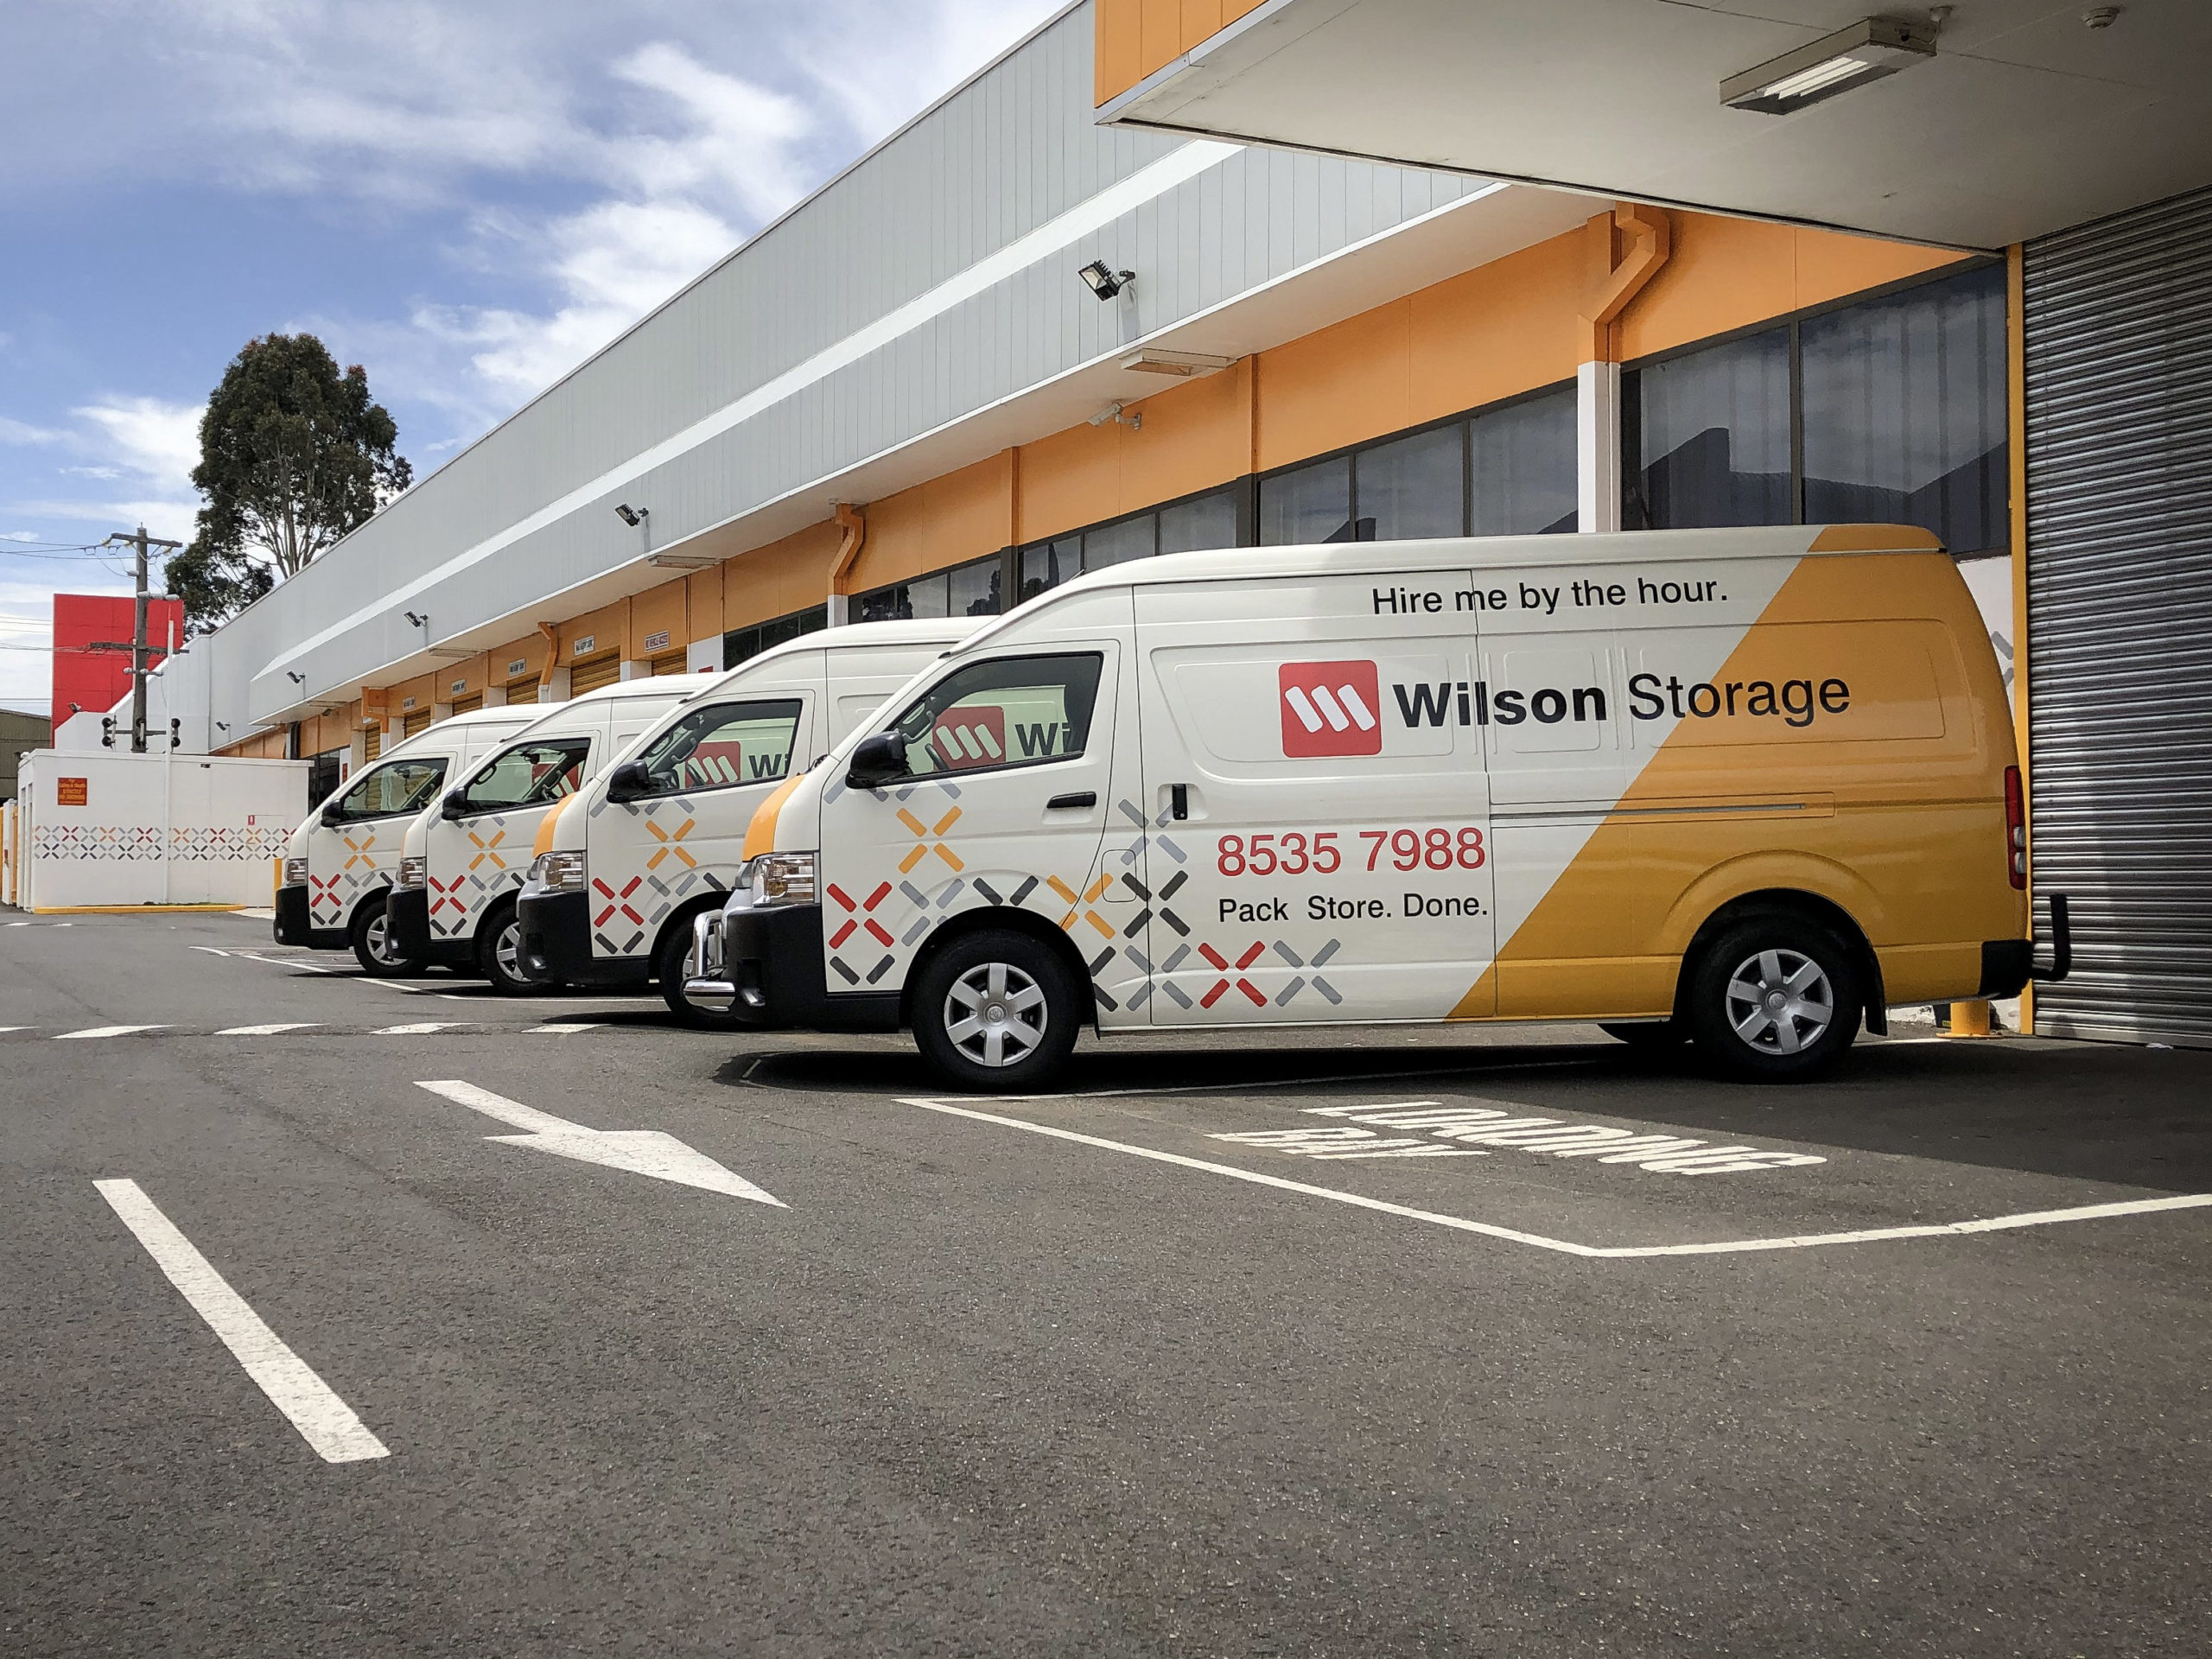 Wilson Storage dedicated fleet of move-in vehicles ideal for Wine Transportation.